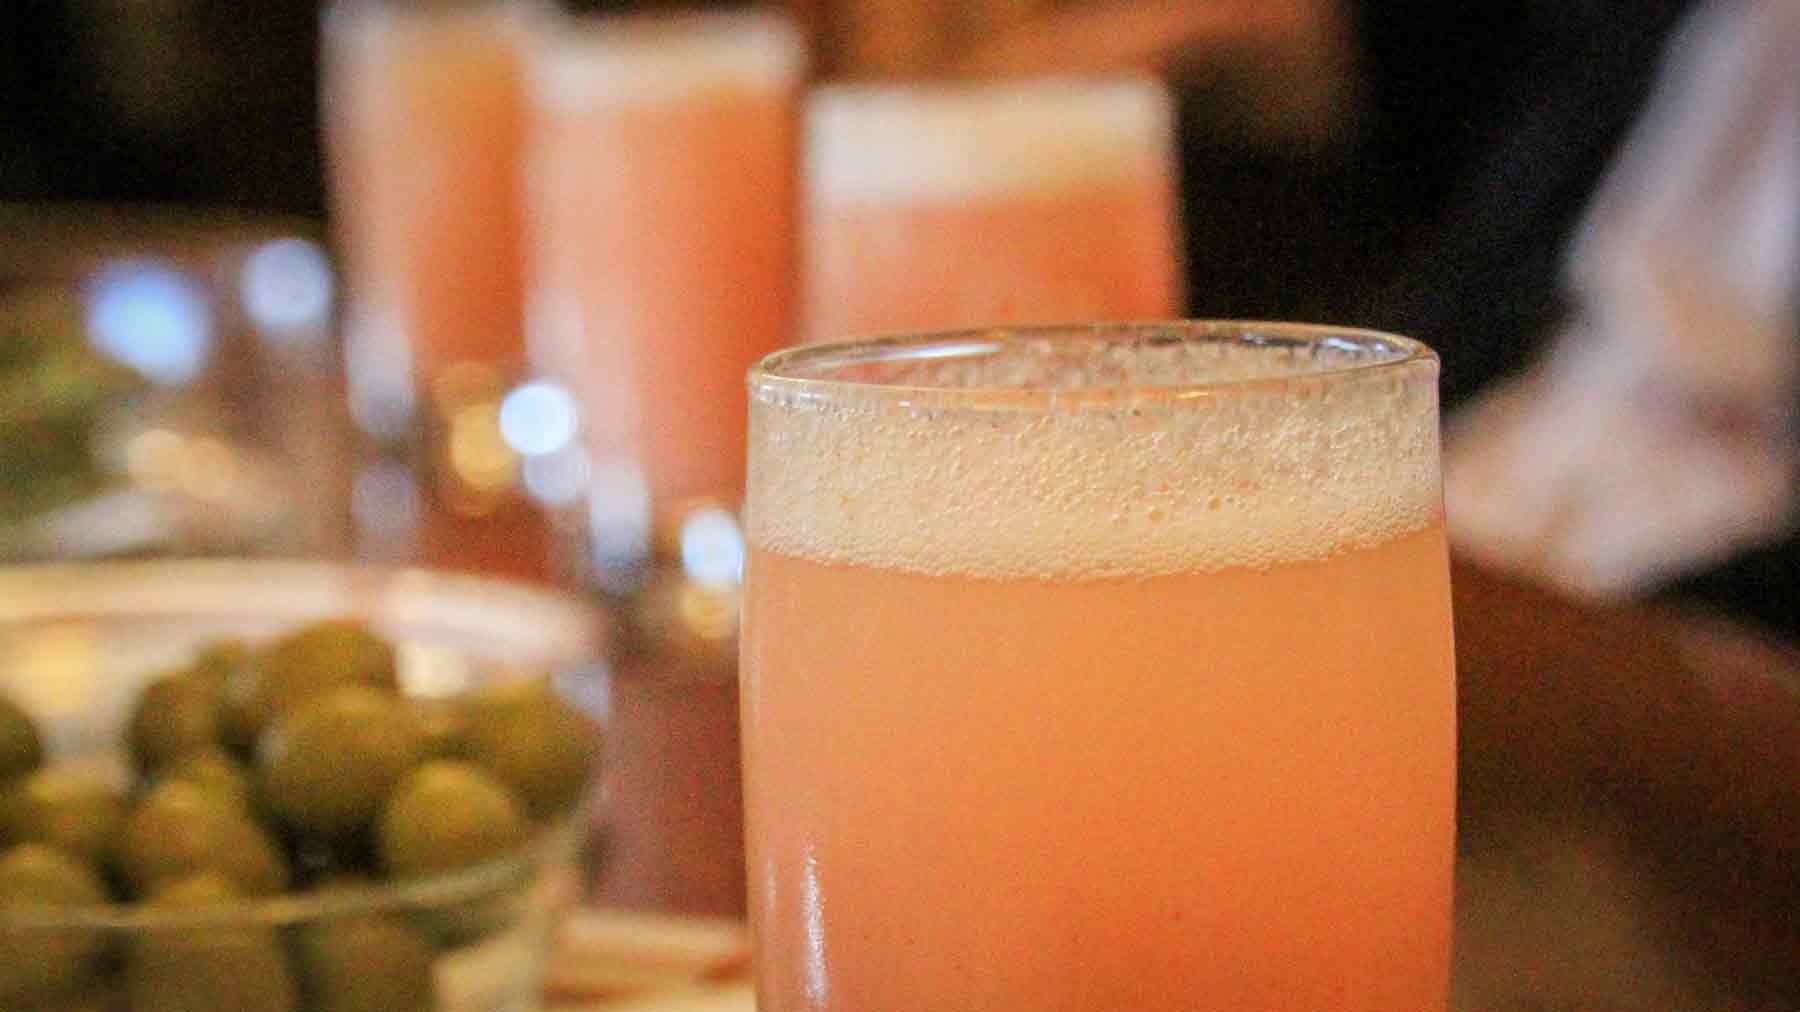 Bellinis lined up at Harry's Bar in Venice